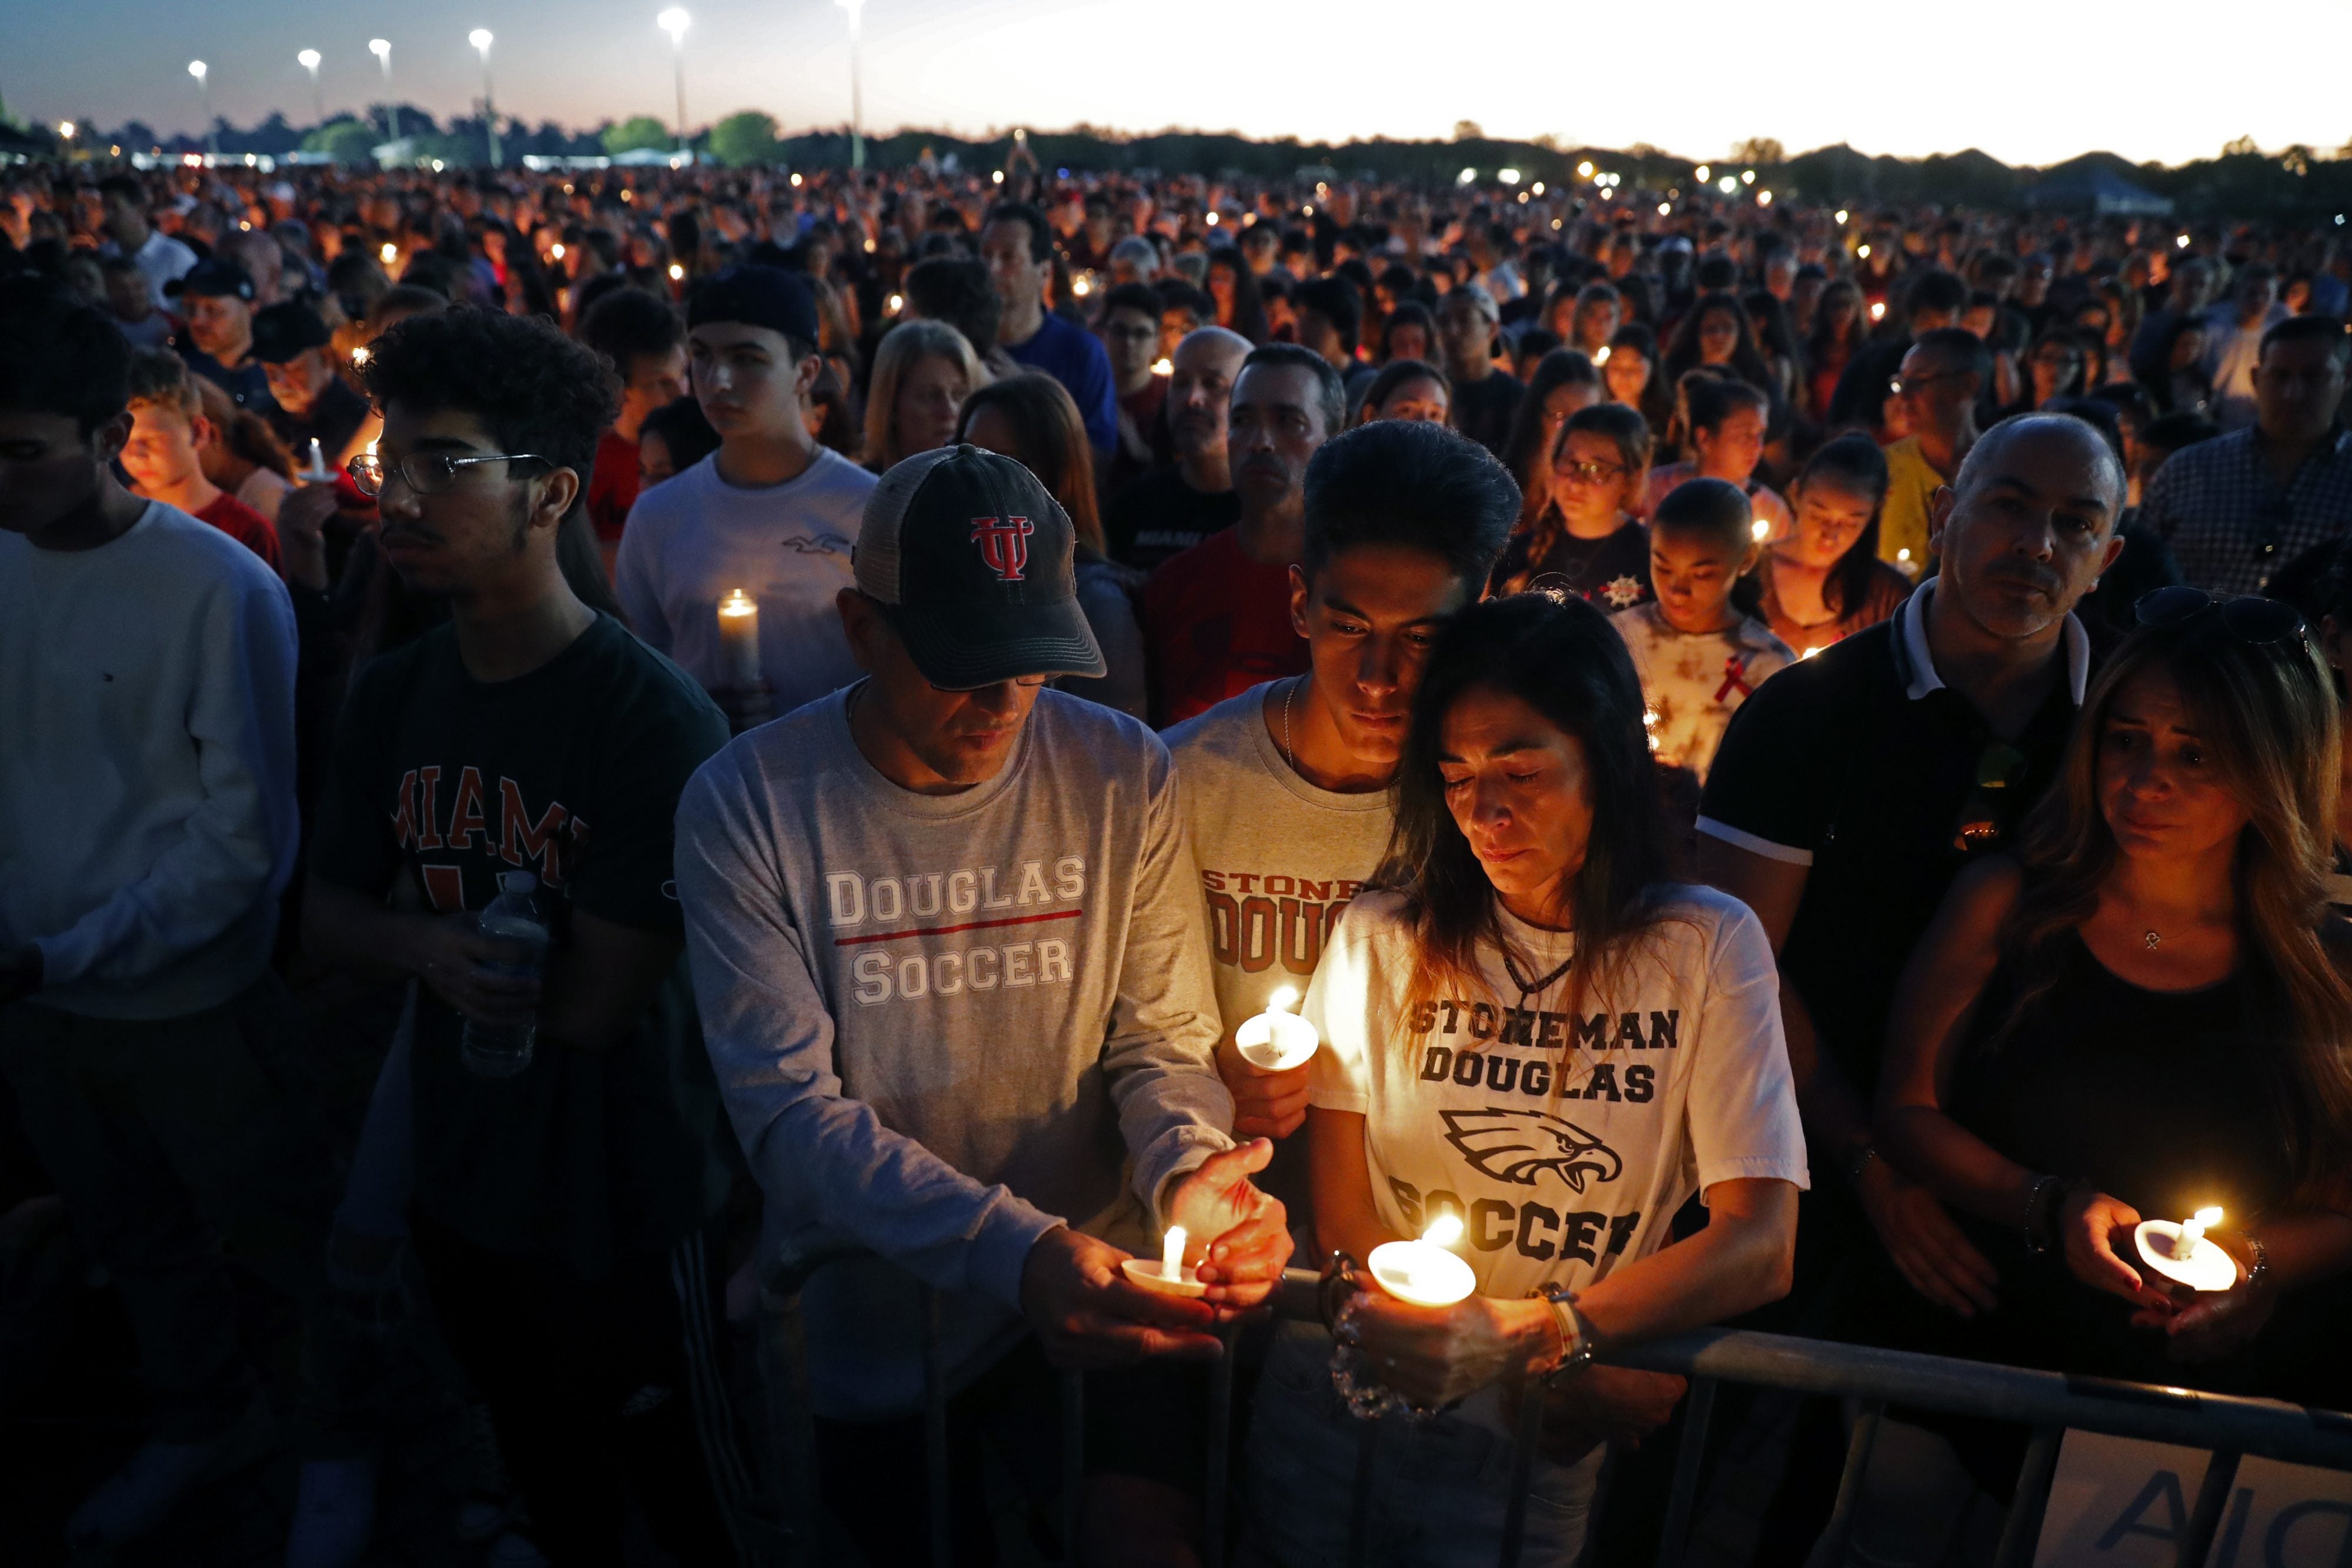 Jorge Zapata, Jr., center, a student at Marjory Stoneman Douglas High School, holds candles with his mother Lavinia Zapata, and father Jorge Zapata, Sr., during a candlelight vigil for the victims of the Wednesday shooting at the school, in Parkland, Fla., Thursd